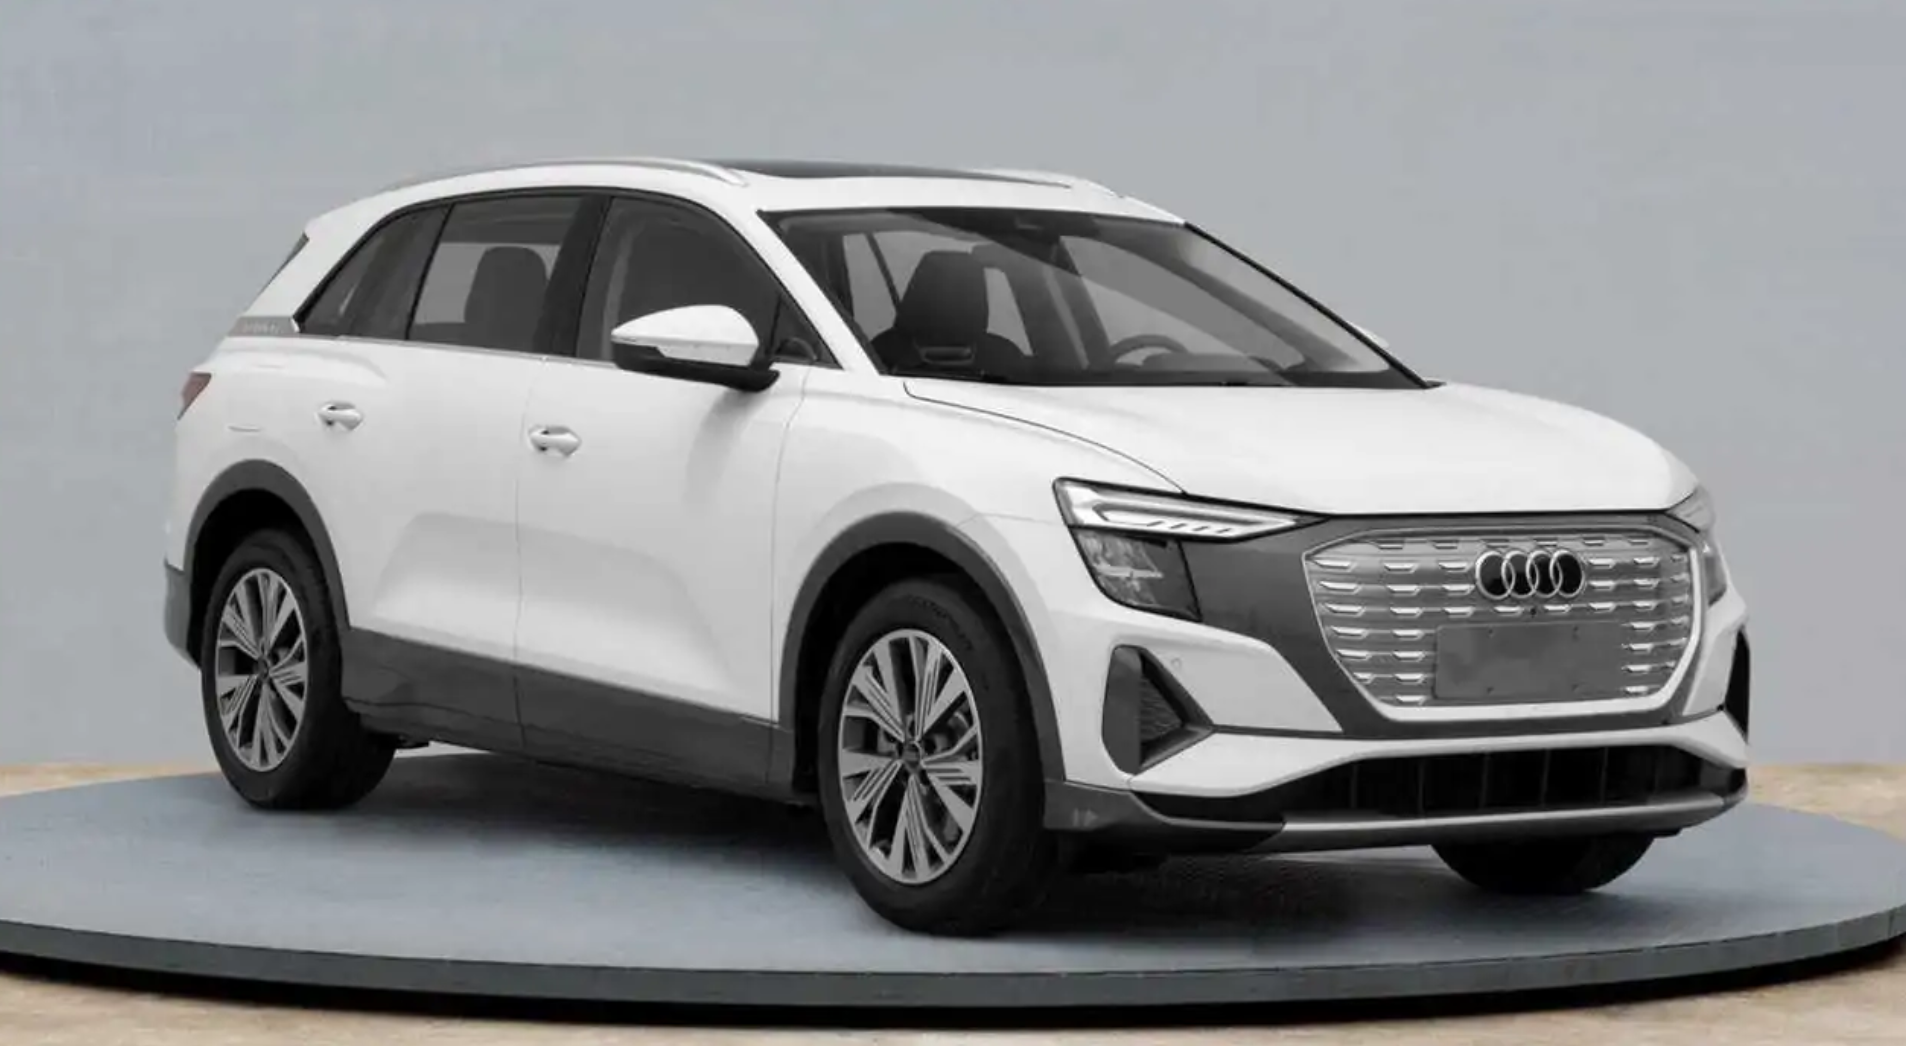 Audi to launch Q5 e-tron in China